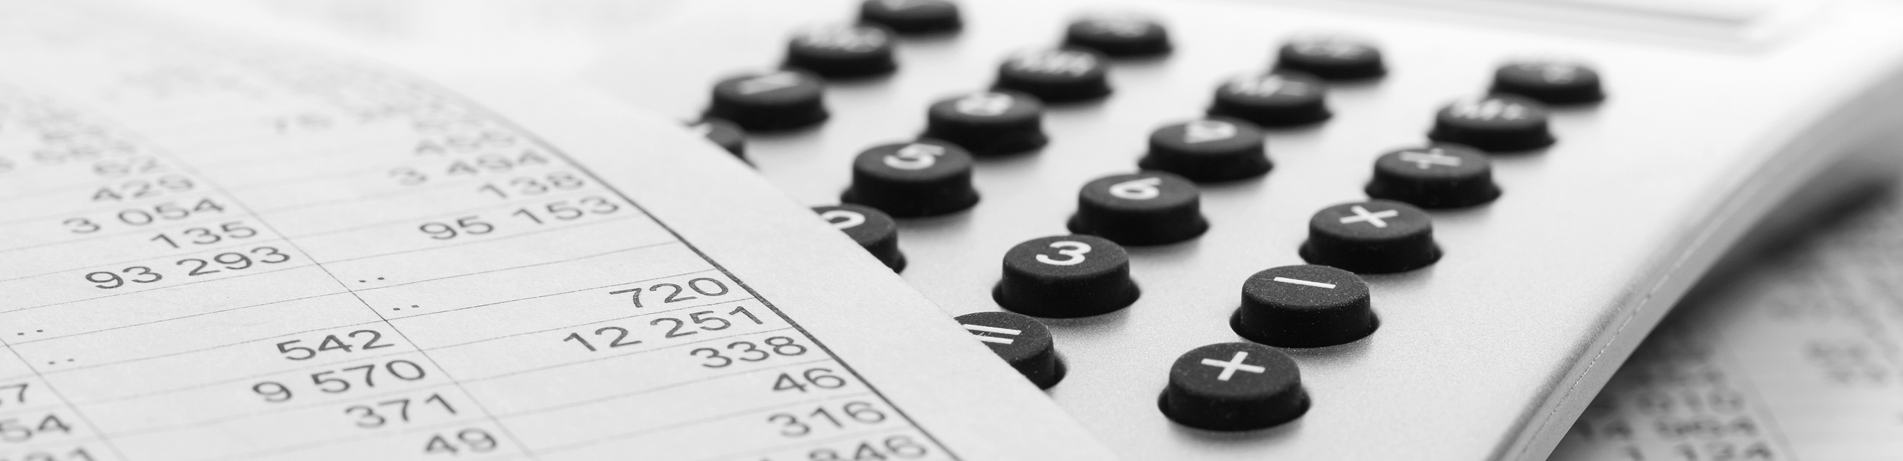 Image of a financial report and calculator